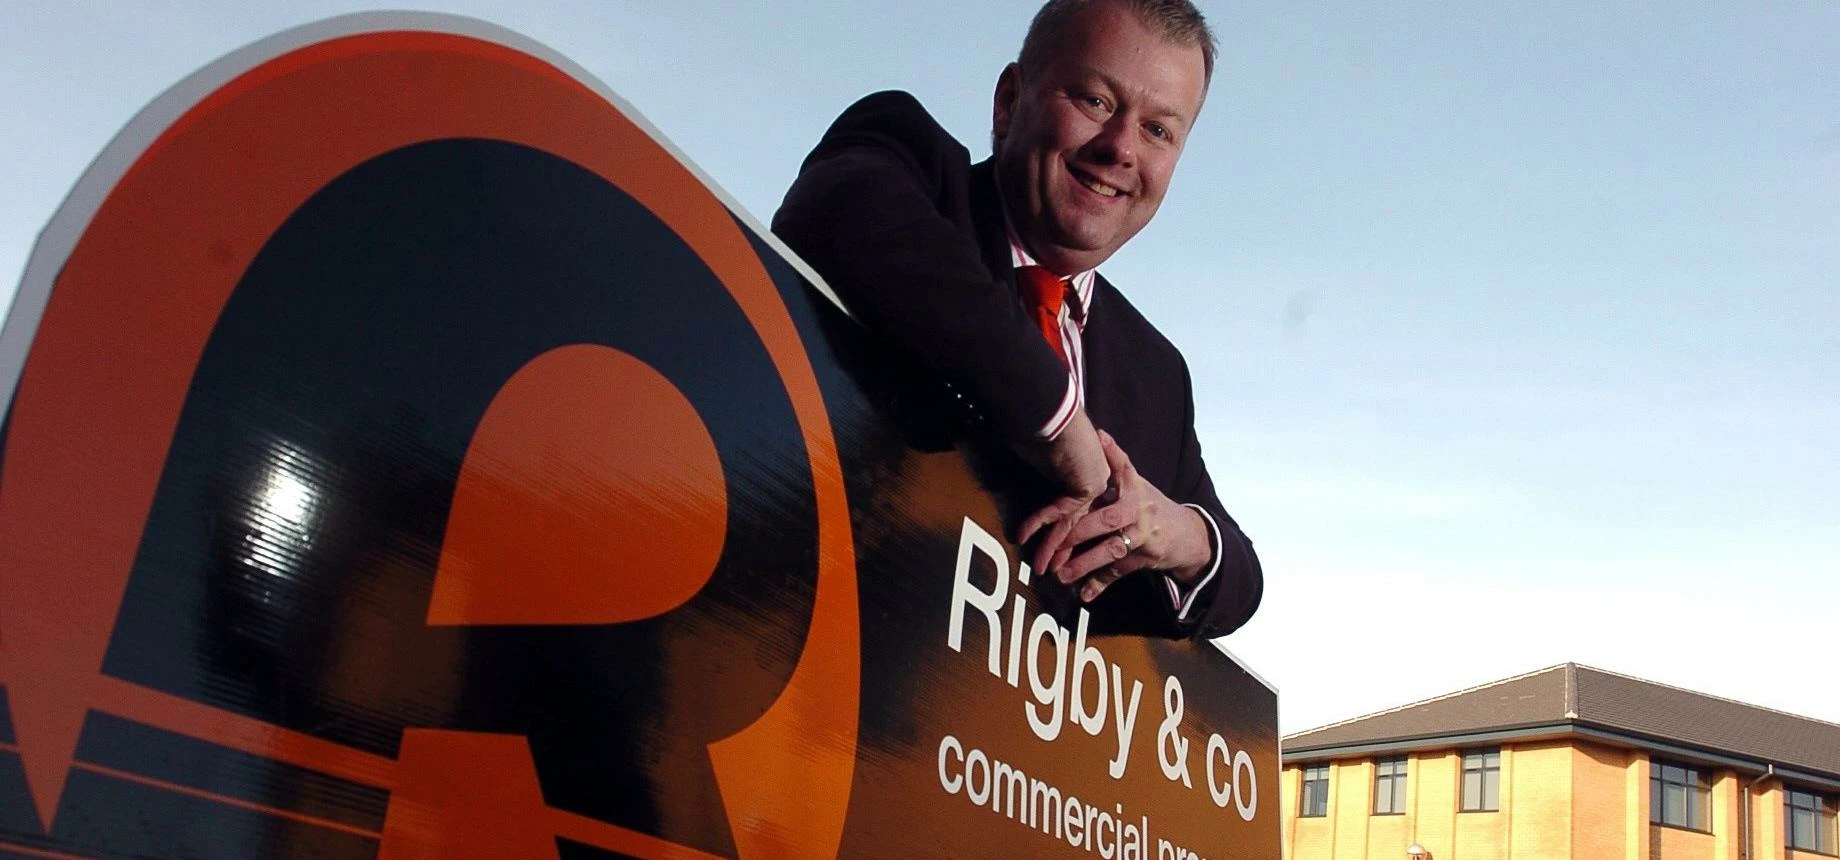 Rigby and Co managing director Russell Rigby